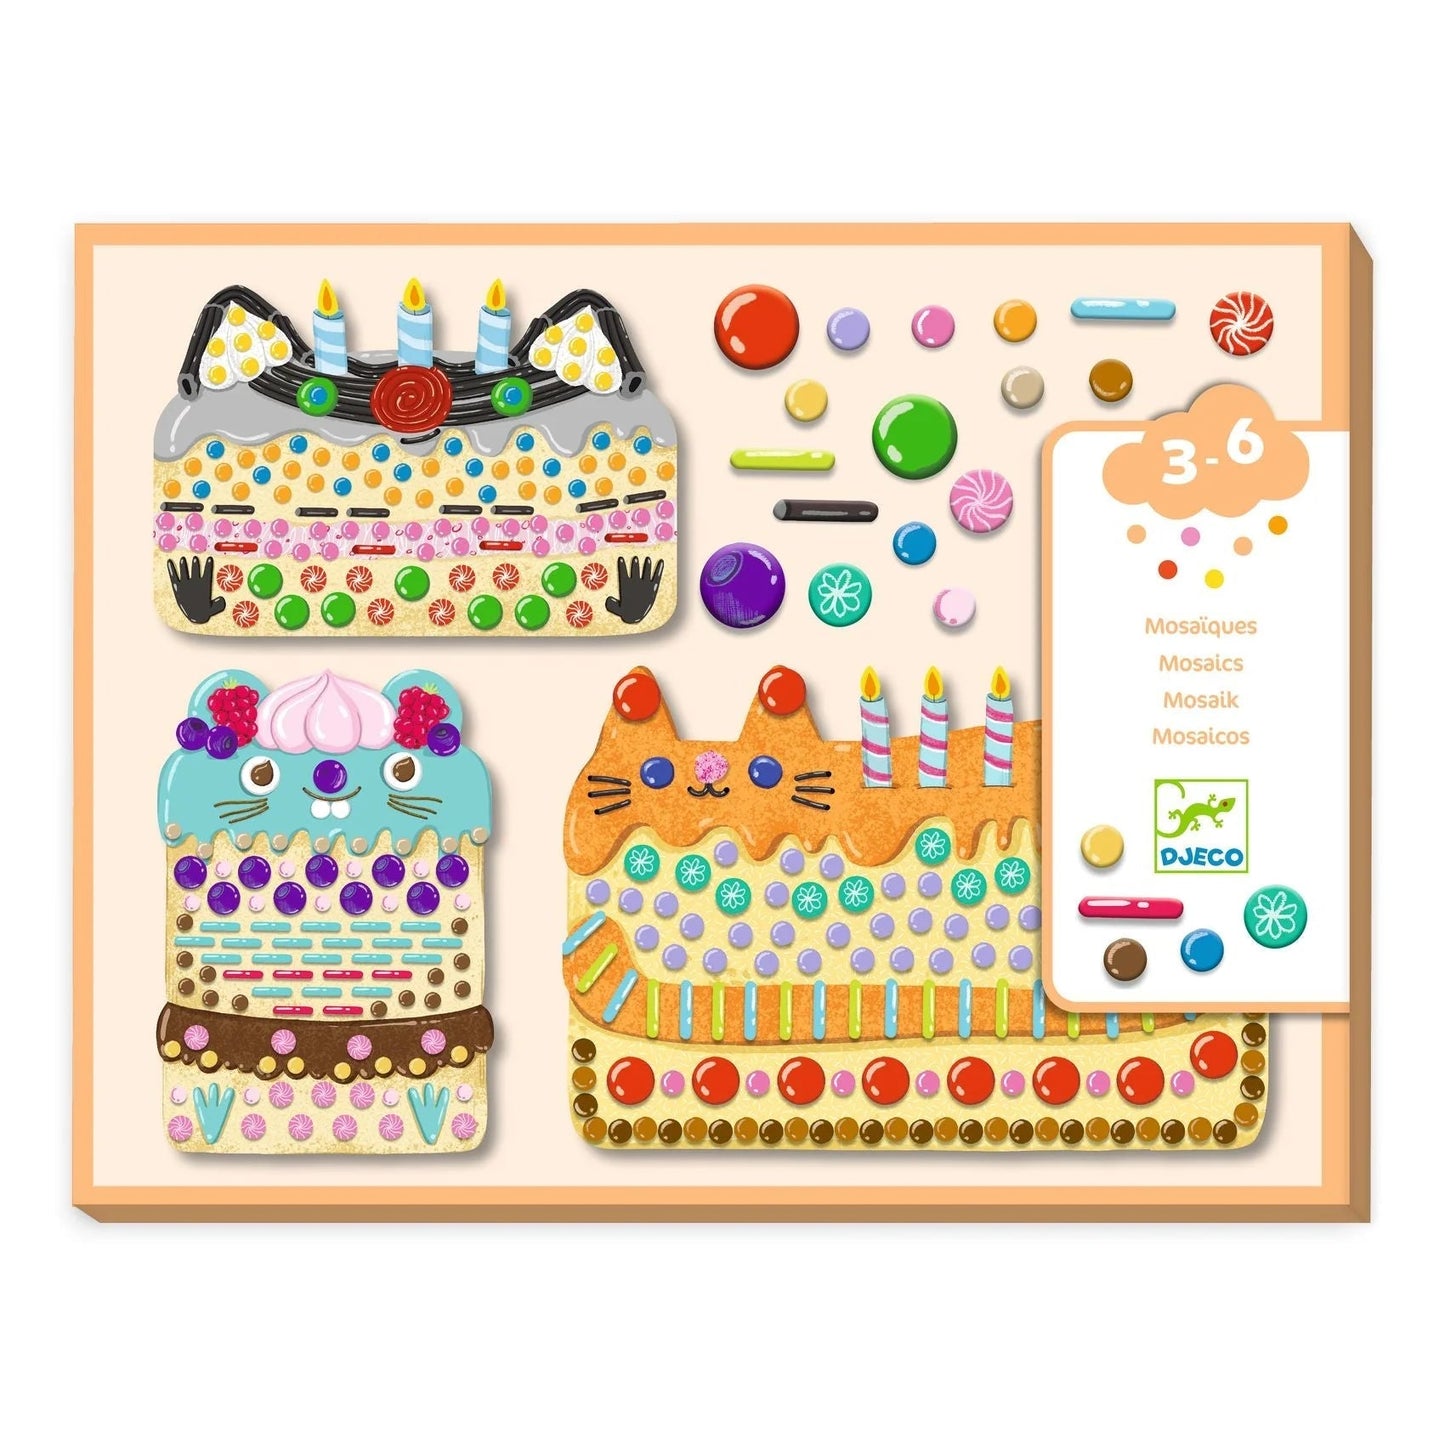 Cakes and Sweets Collage Craft